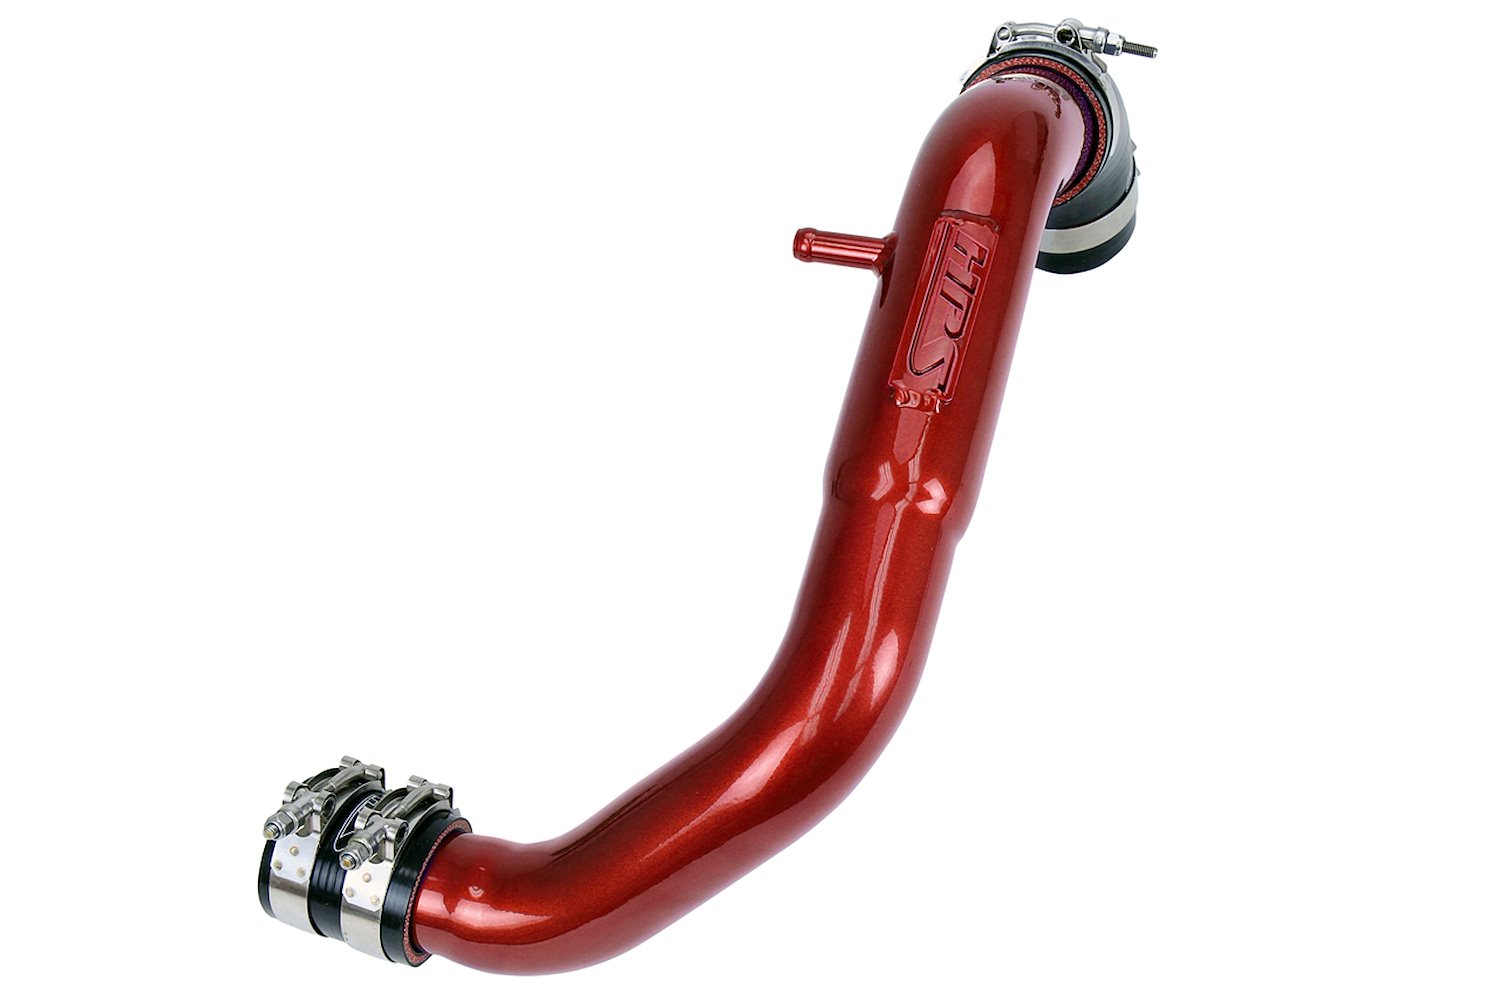 17-110R Turbo Charge Pipe Kit, Dyno Proven +15 HP, +19 TQ, Reduce Turbo Lag, 2.5 in. Pipe